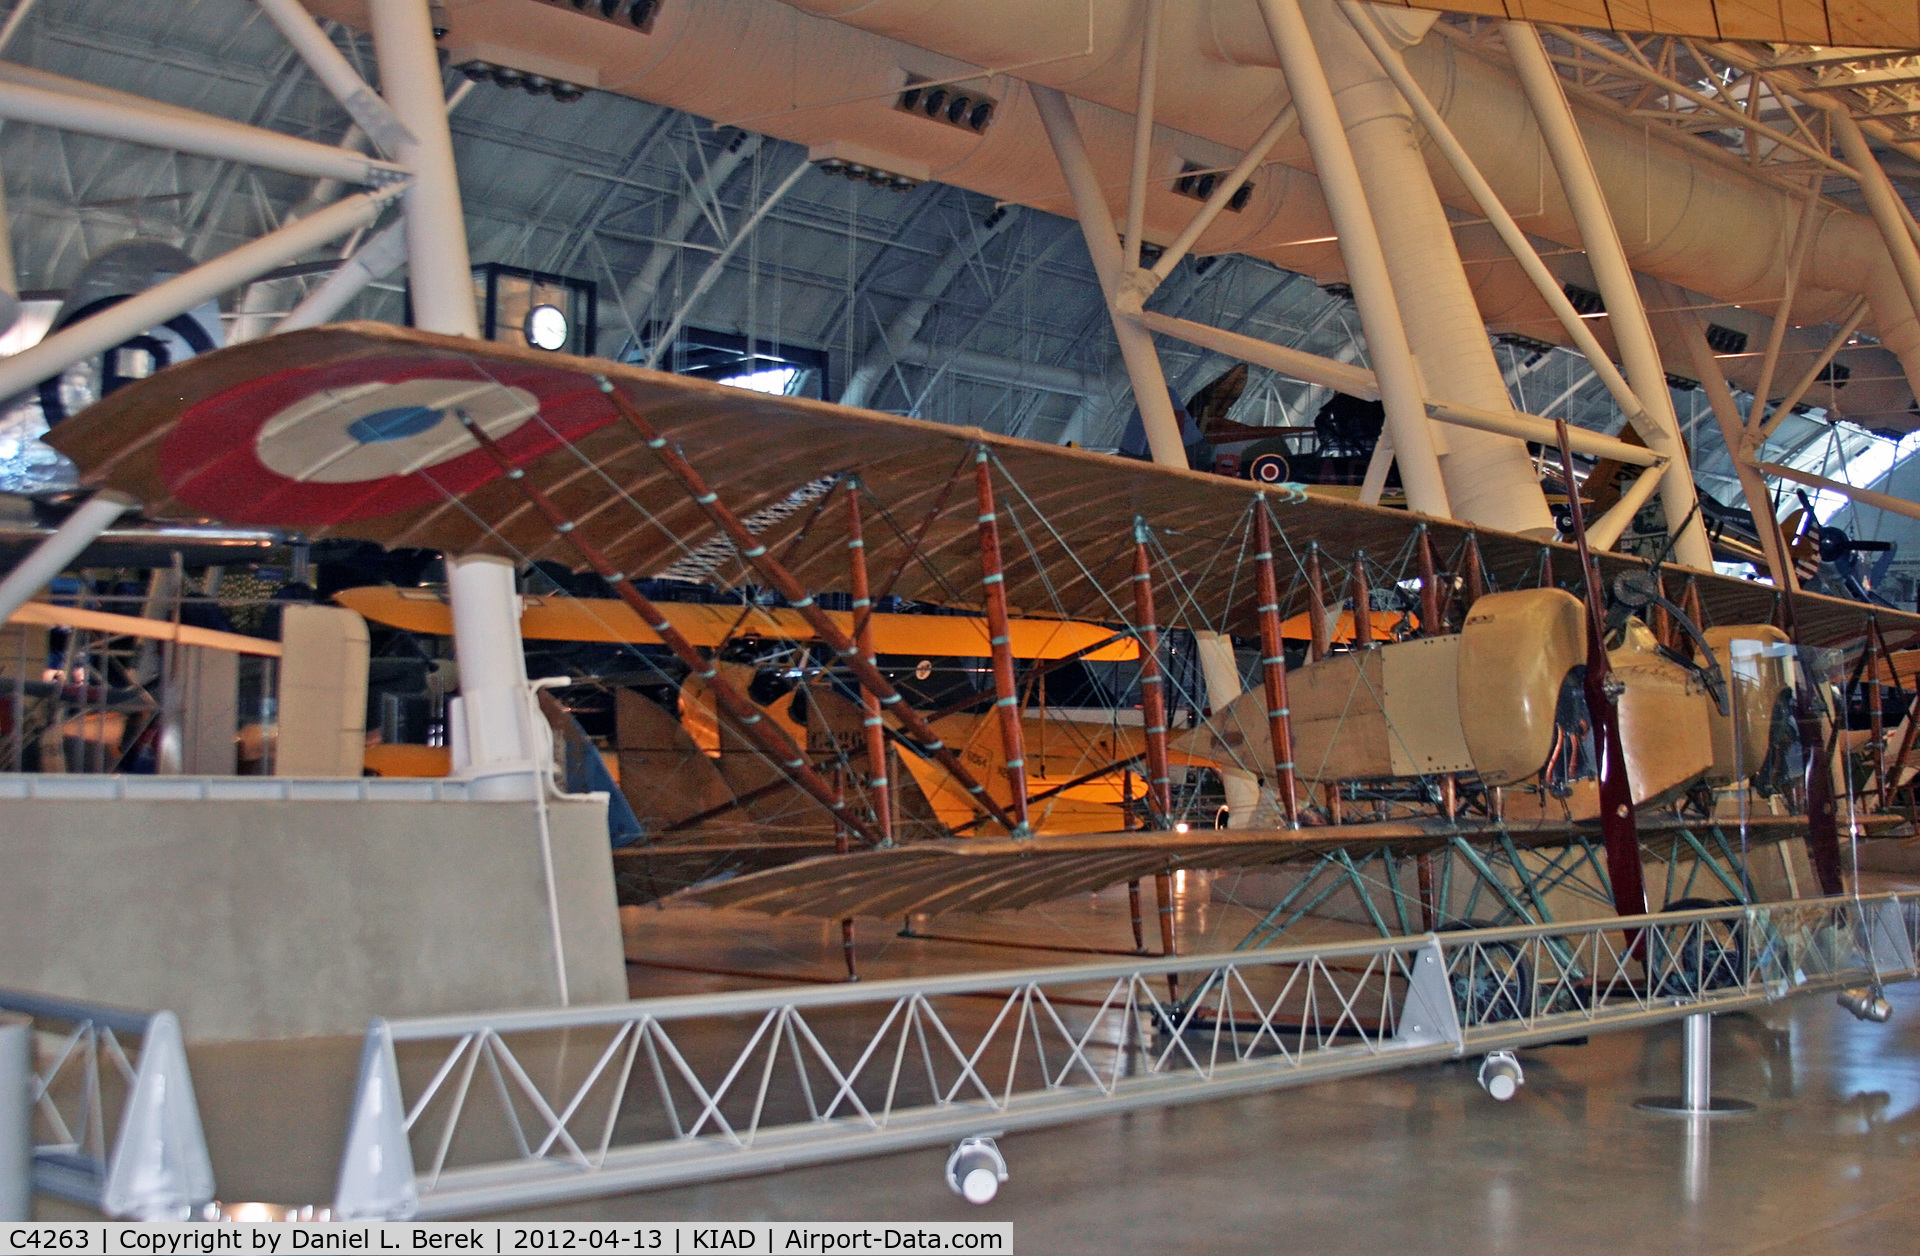 C4263, 1916 Caudron G.4 C/N 2170, Not only is this milestone aircraft extremely rare, but also it is the oldest surviving bomber in the world.